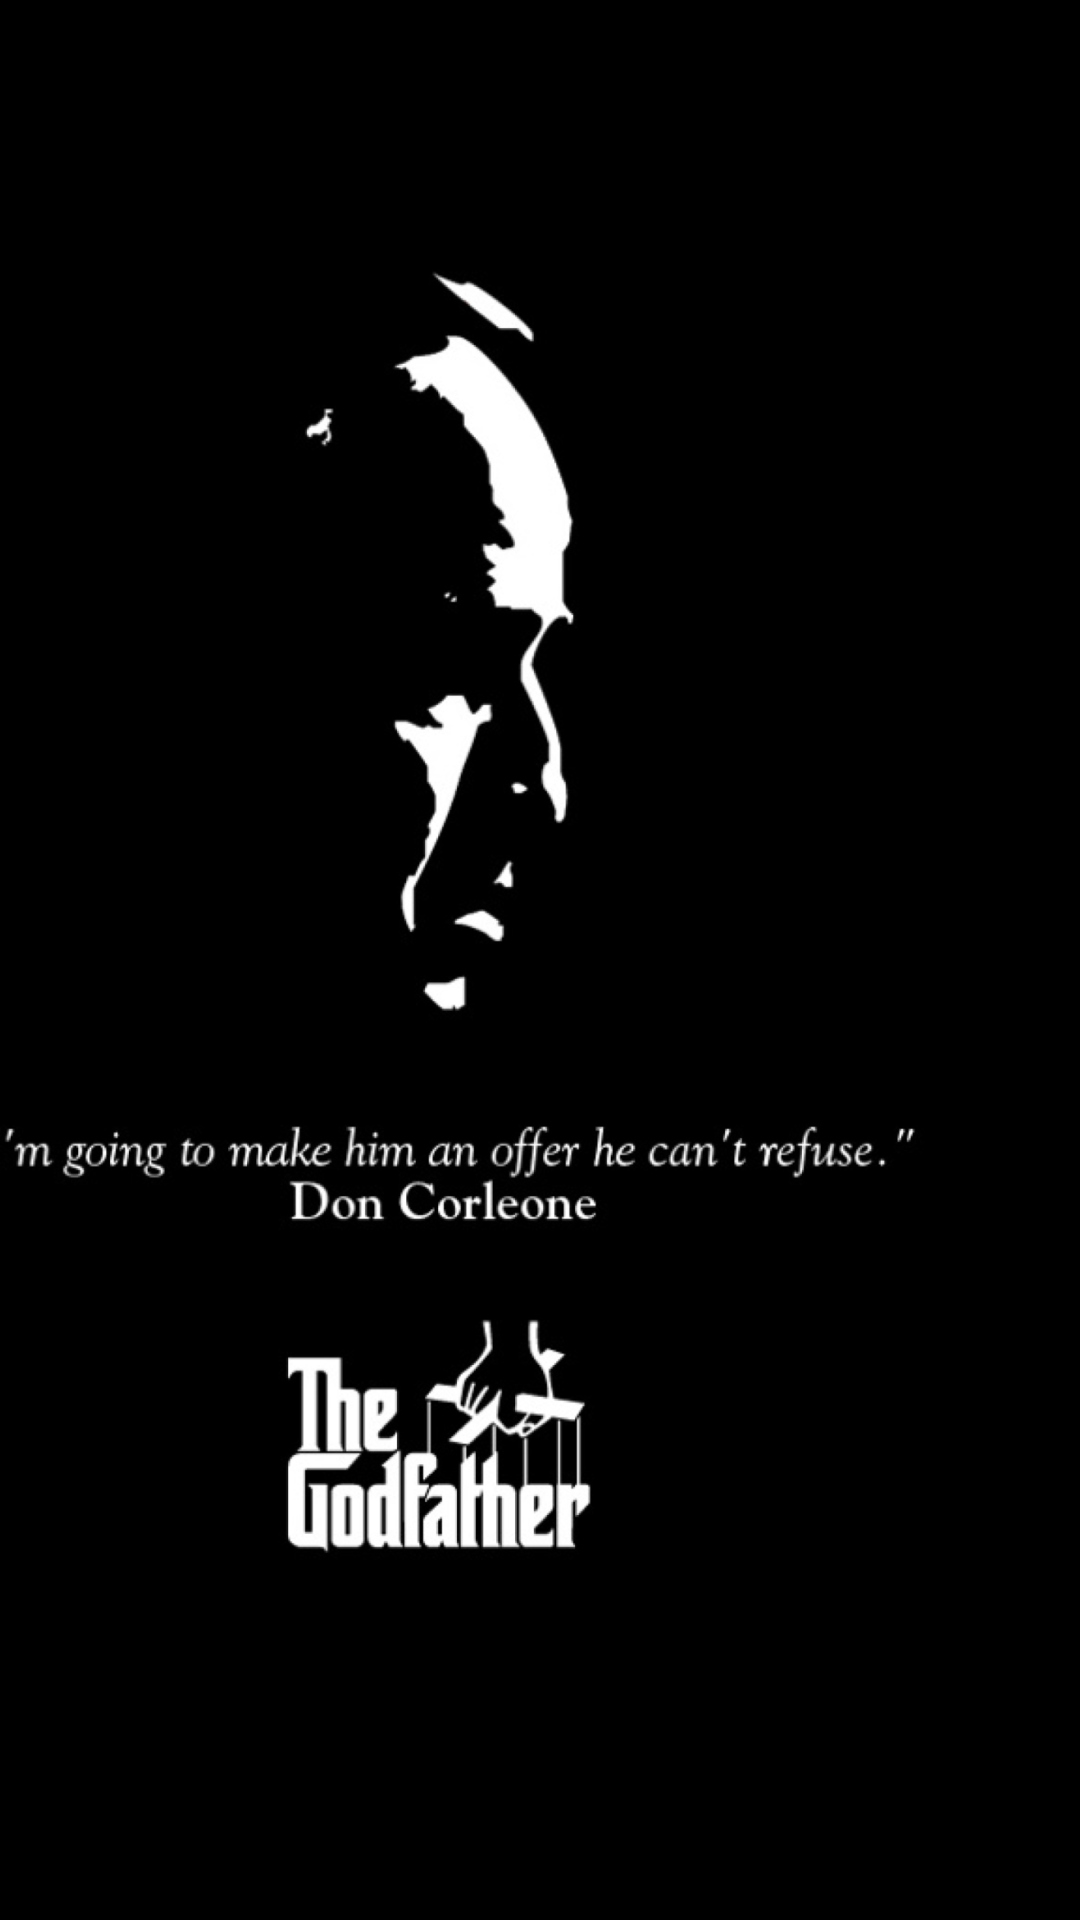 7 Best 'The Godfather' HD 4K Wallpapers for iPhone or PC